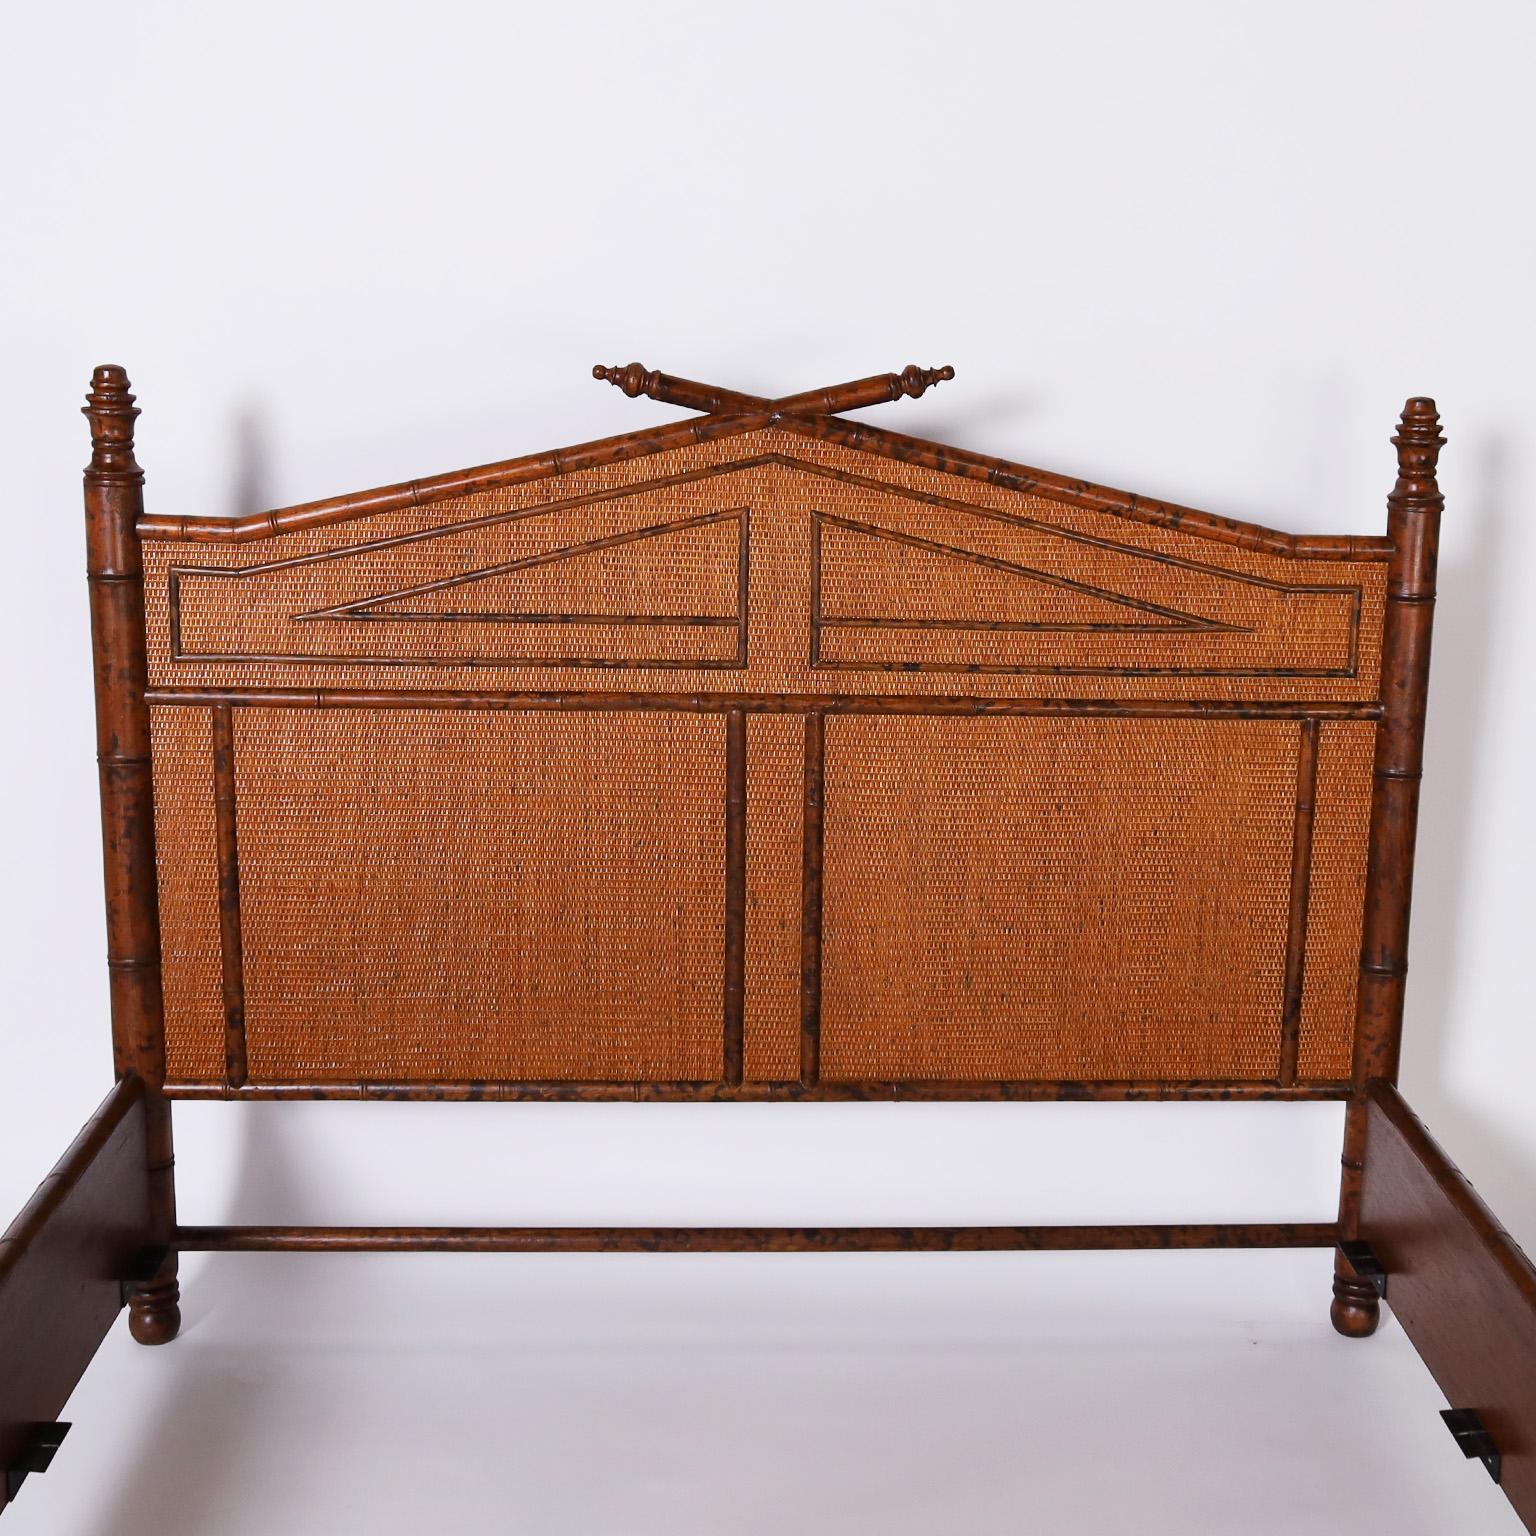 British colonial style queen size bed frame with a faux bamboo frame having a faux tortoise finish and grasscloth panels with applied faux bamboo geometric designs. 

Inside Measurements W: 64 D: 80.